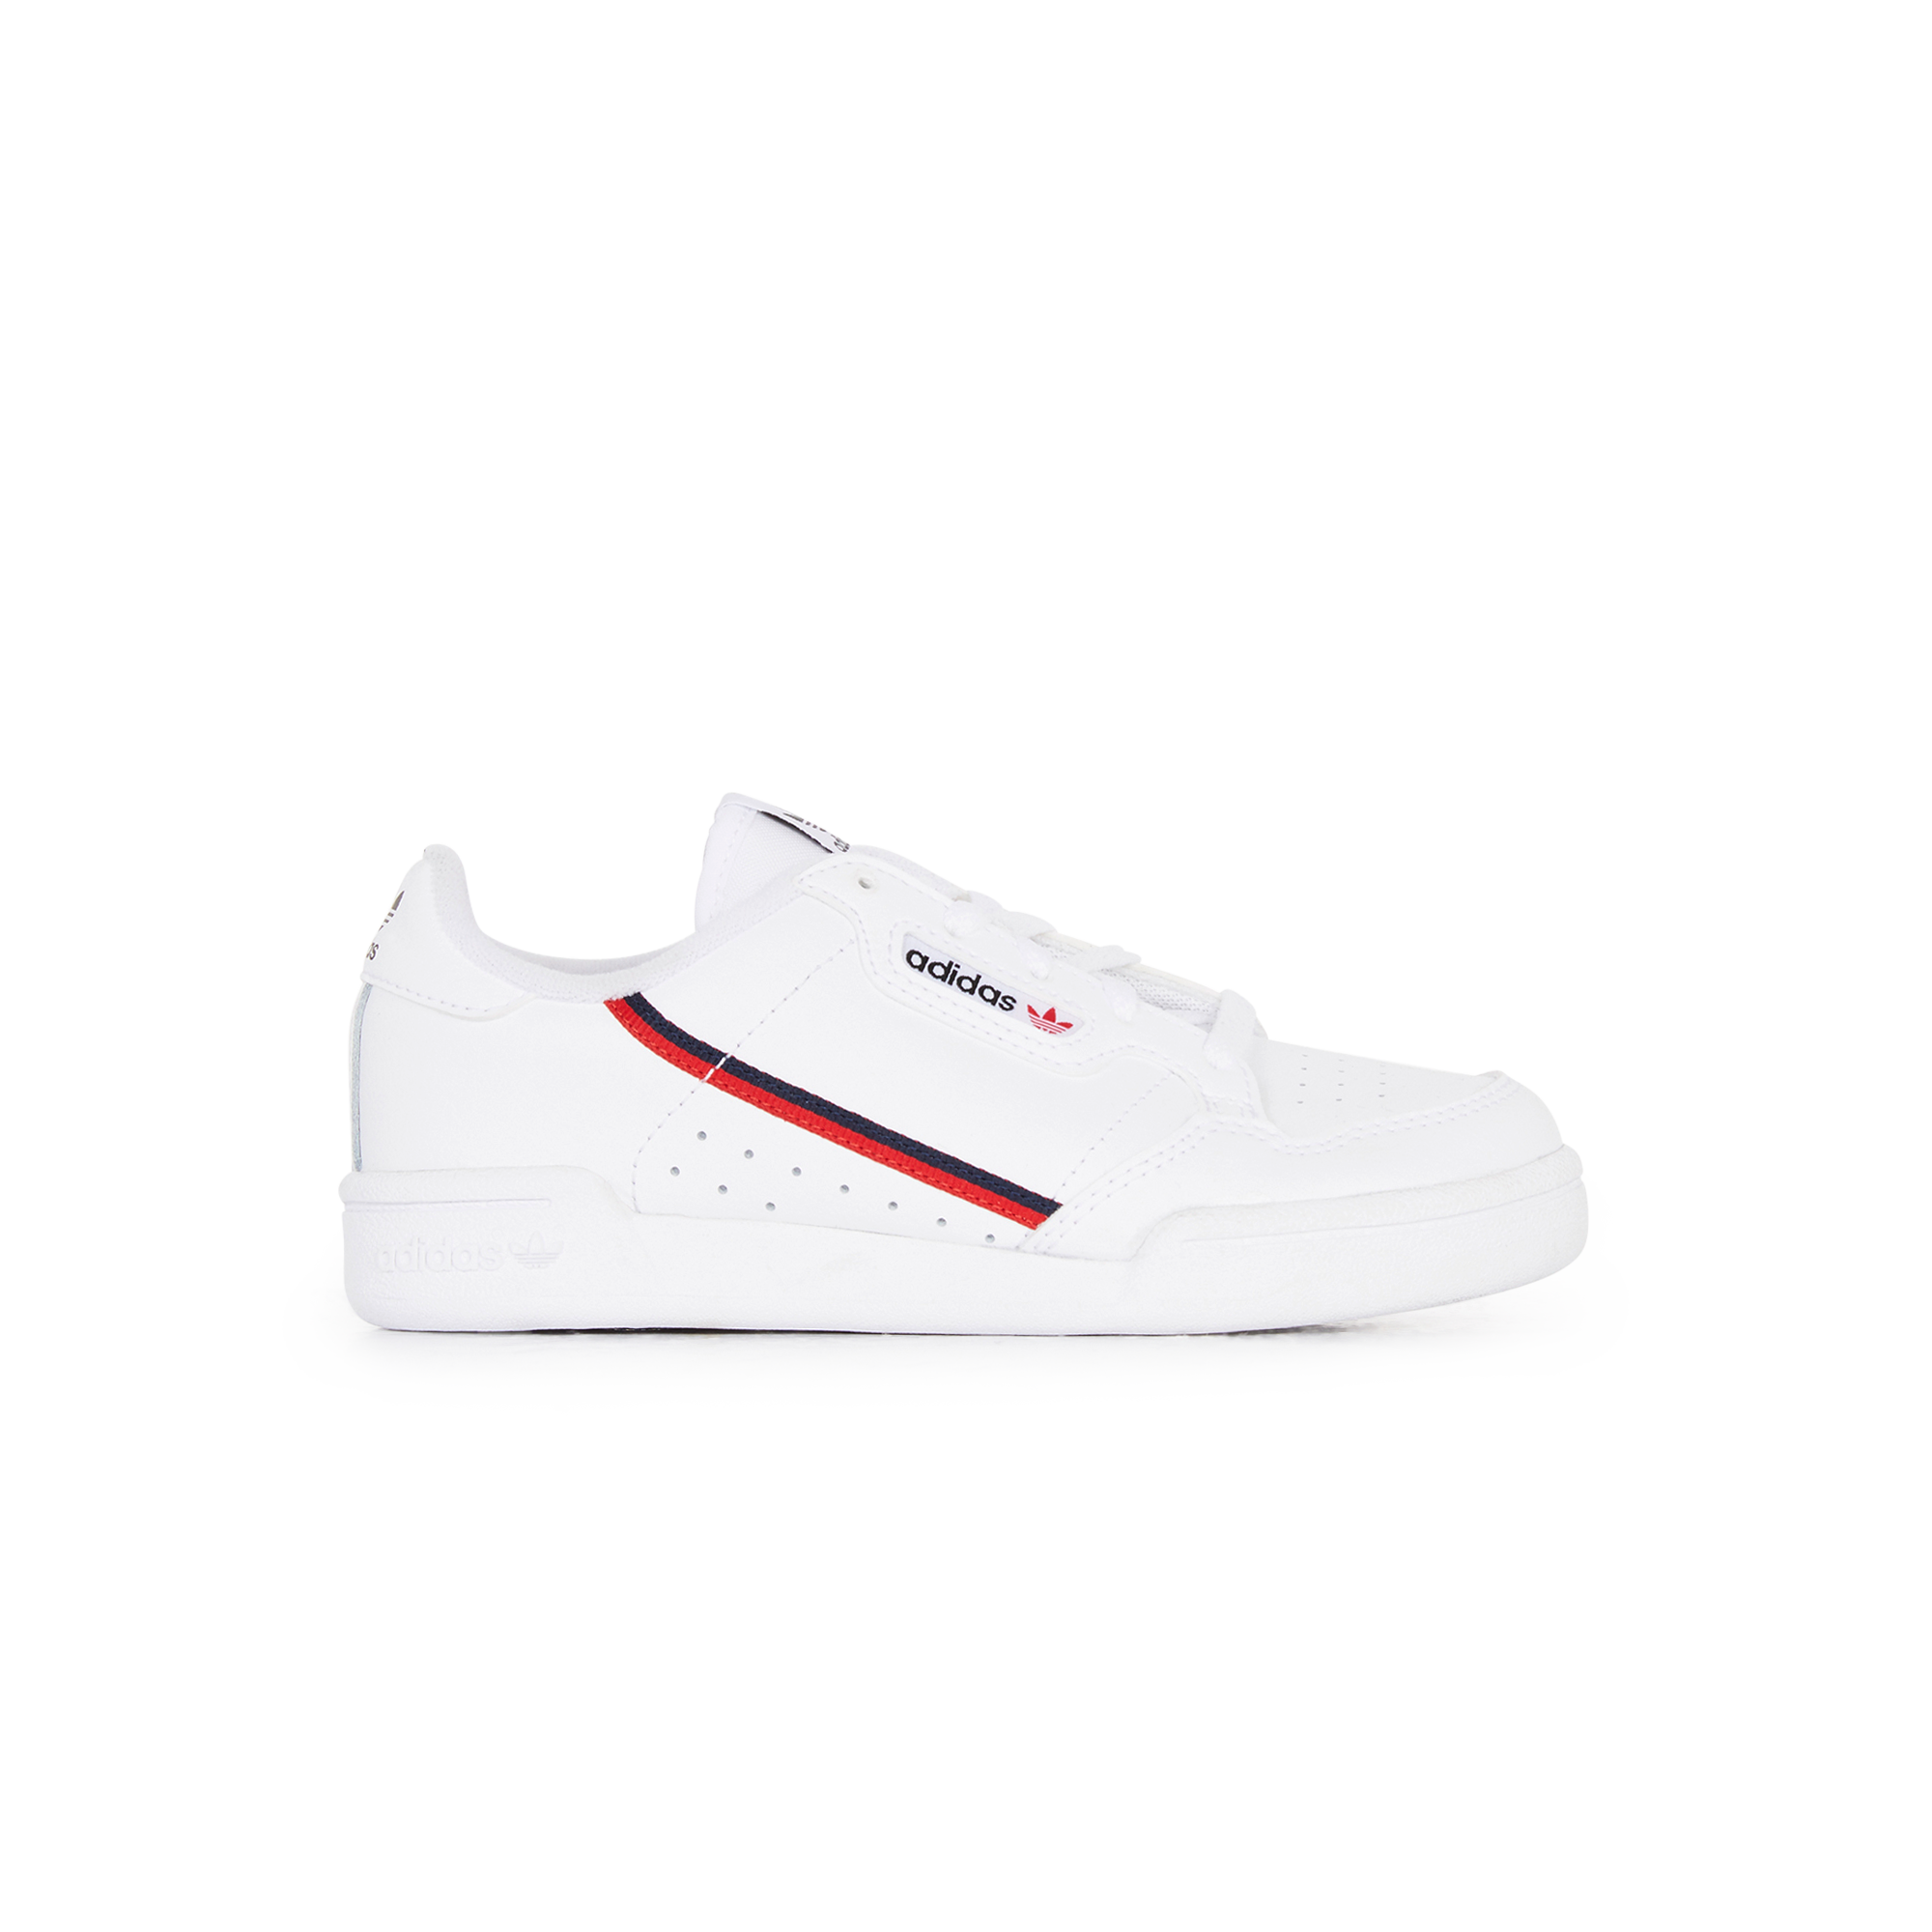 adidas continental rouge